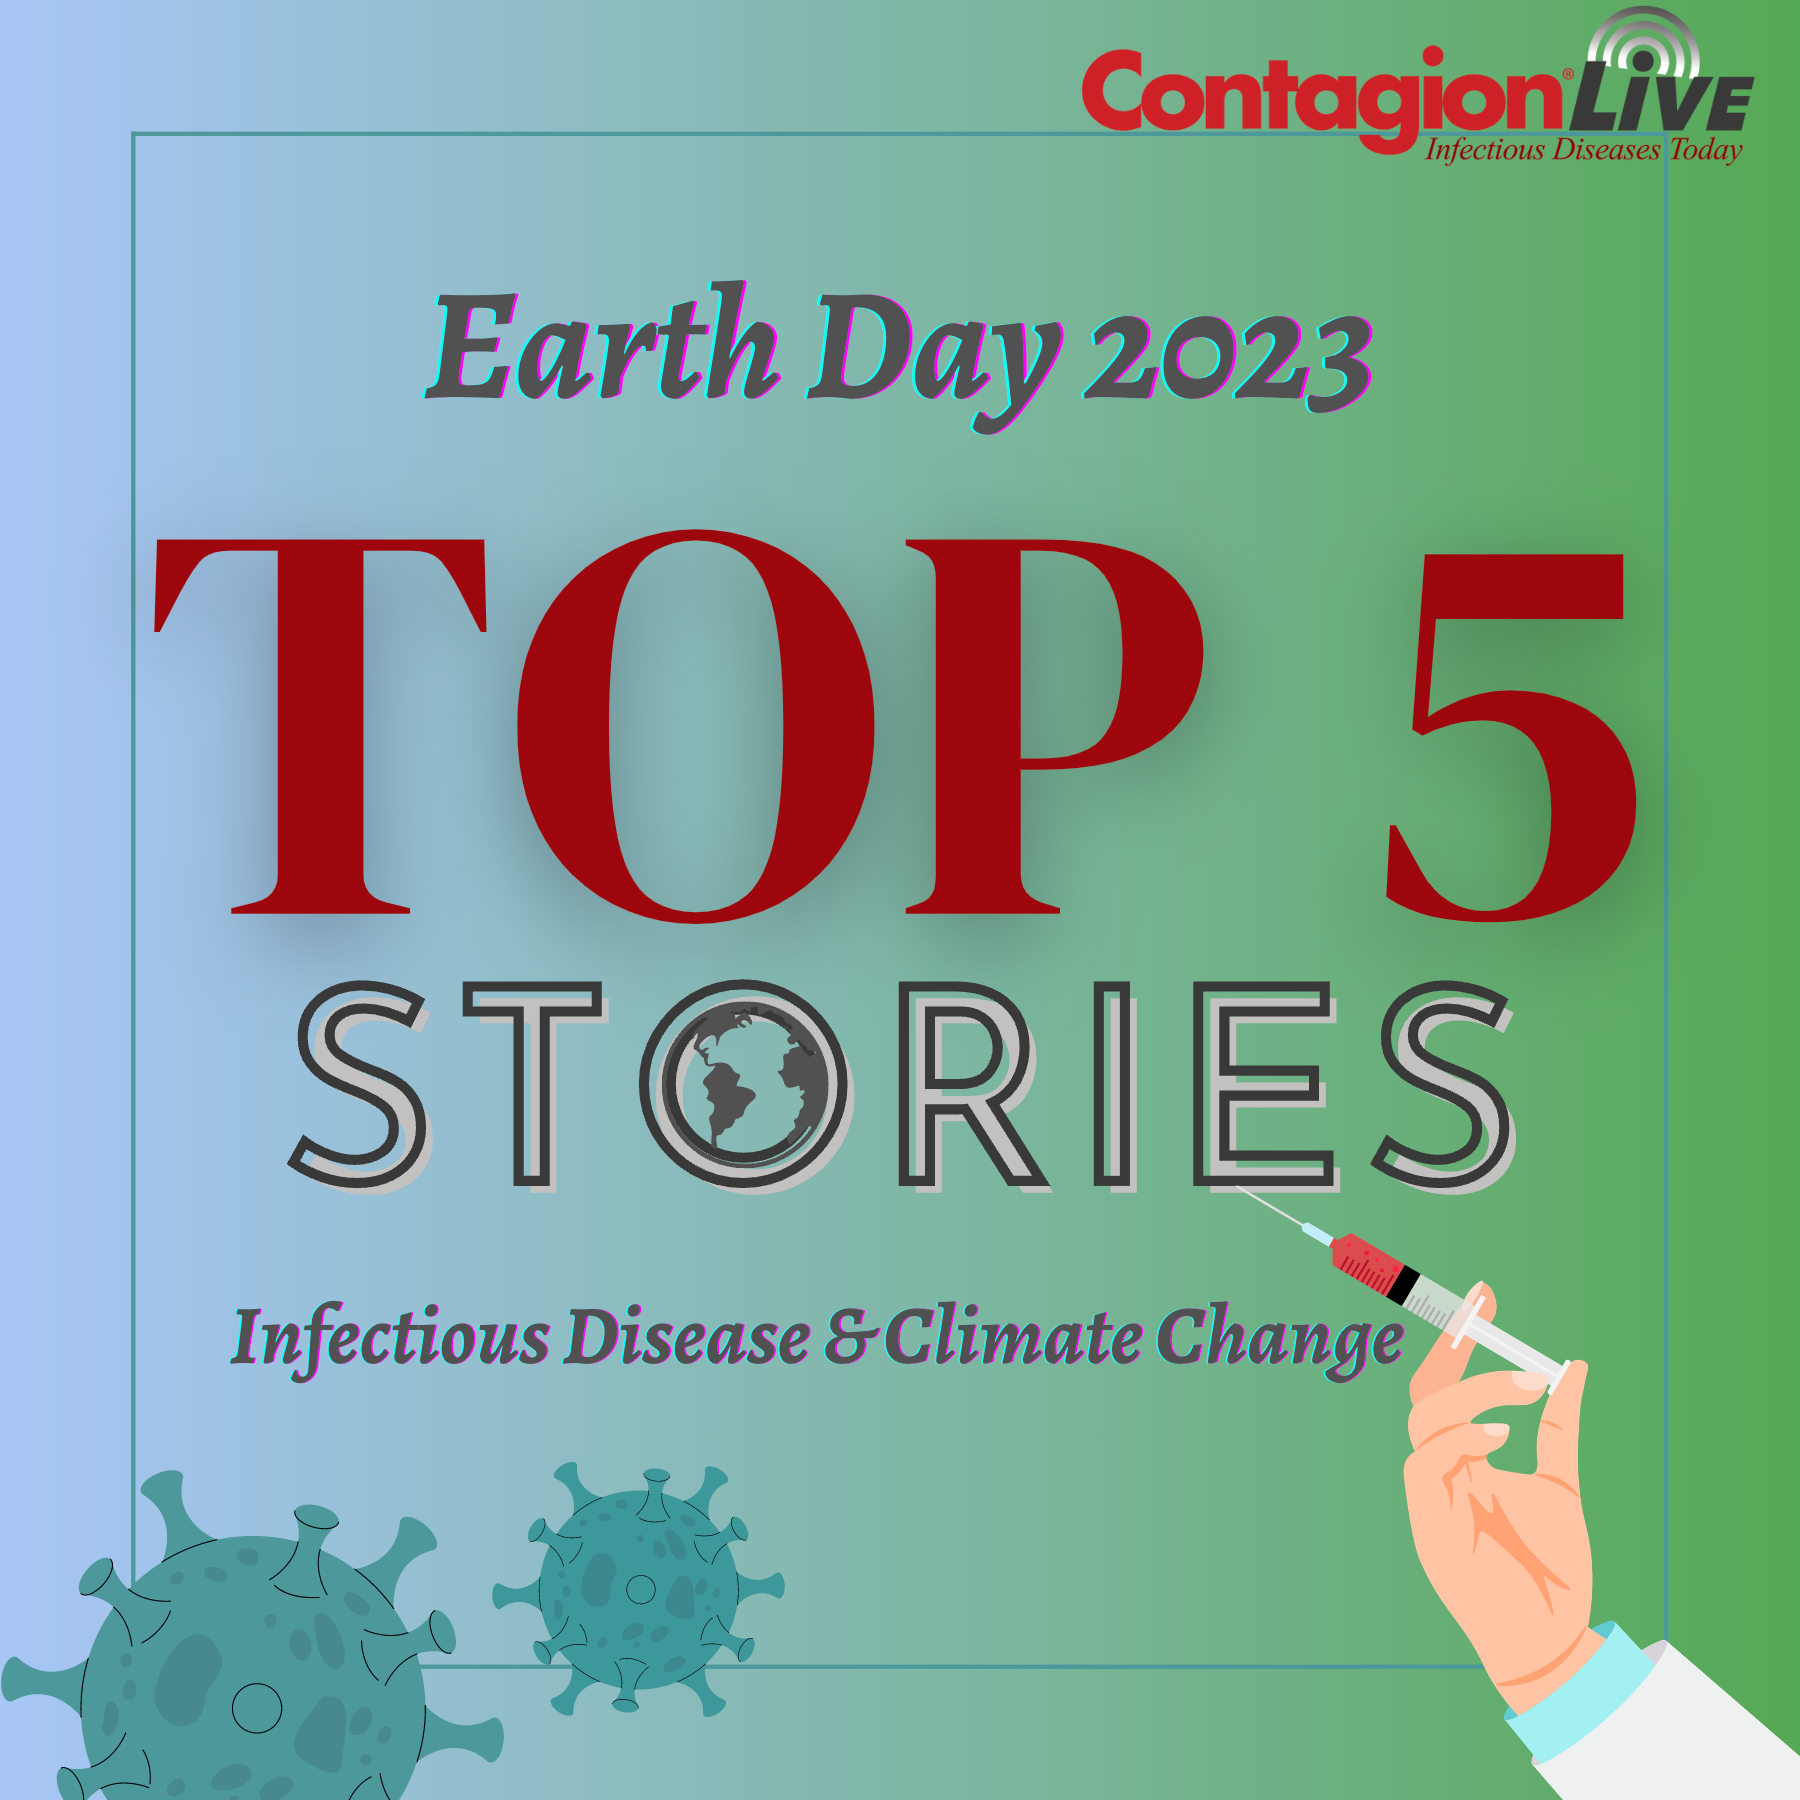 The floods, heat waves, droughts, and other calamities caused by excessive greenhouse gas emissions also make us more vulnerable to ill effects of pathogens such as bacteria, viruses, plants and fungi